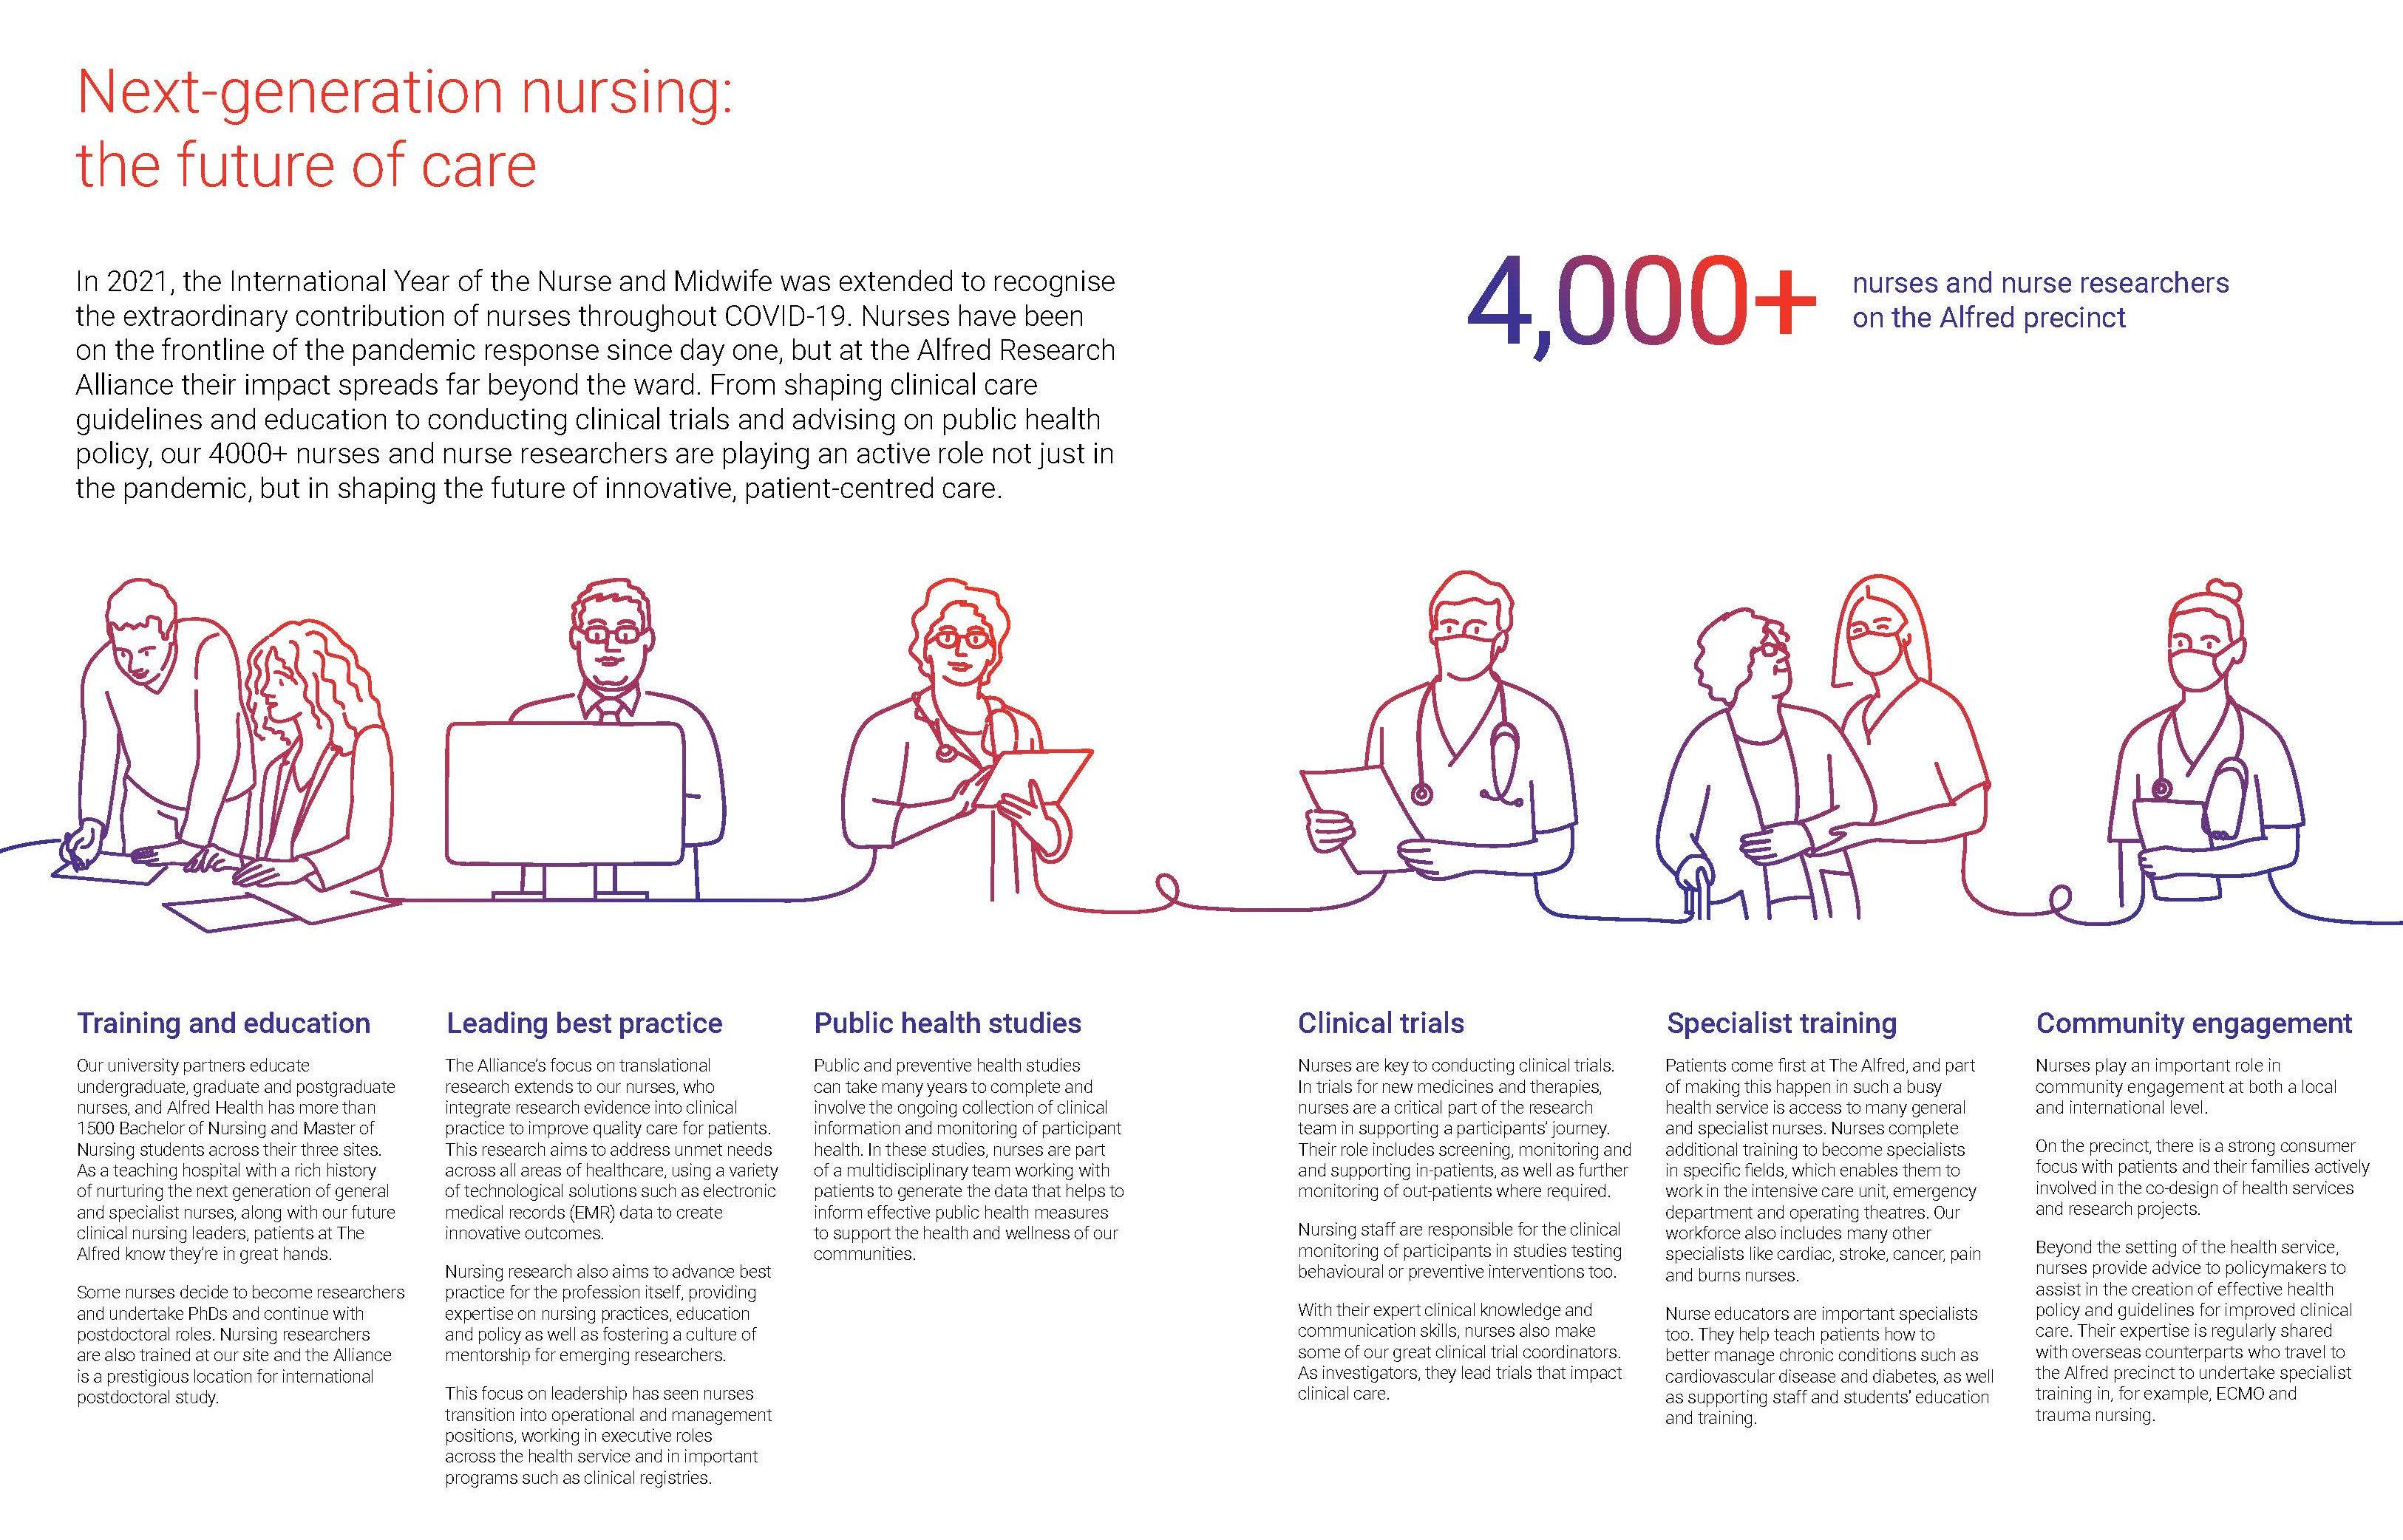 Alfred Research Alliance nursing infographic